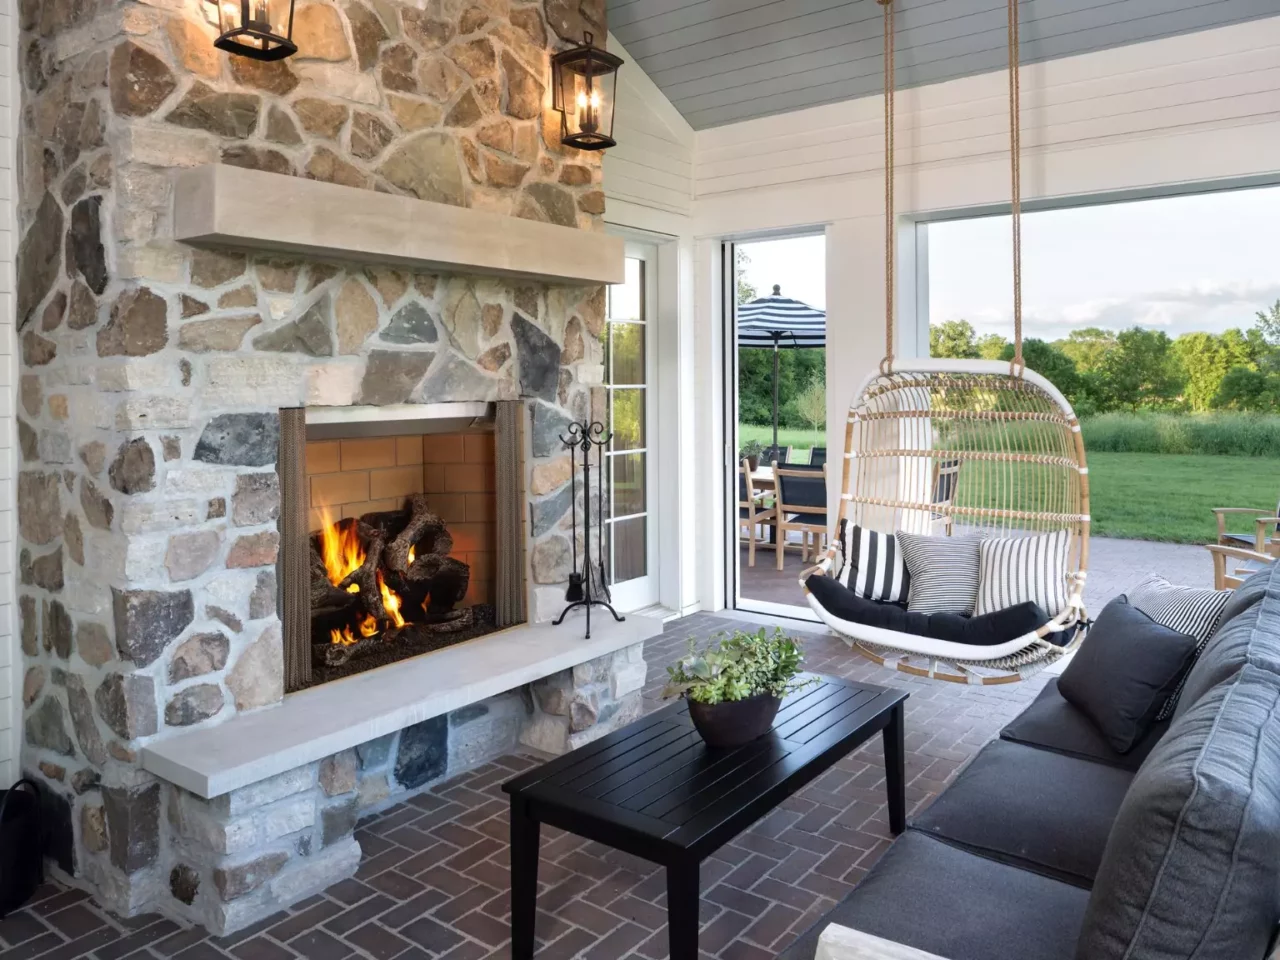 HNG_Castlewood_fireplace_outdoor_swingseat-2x-jpg